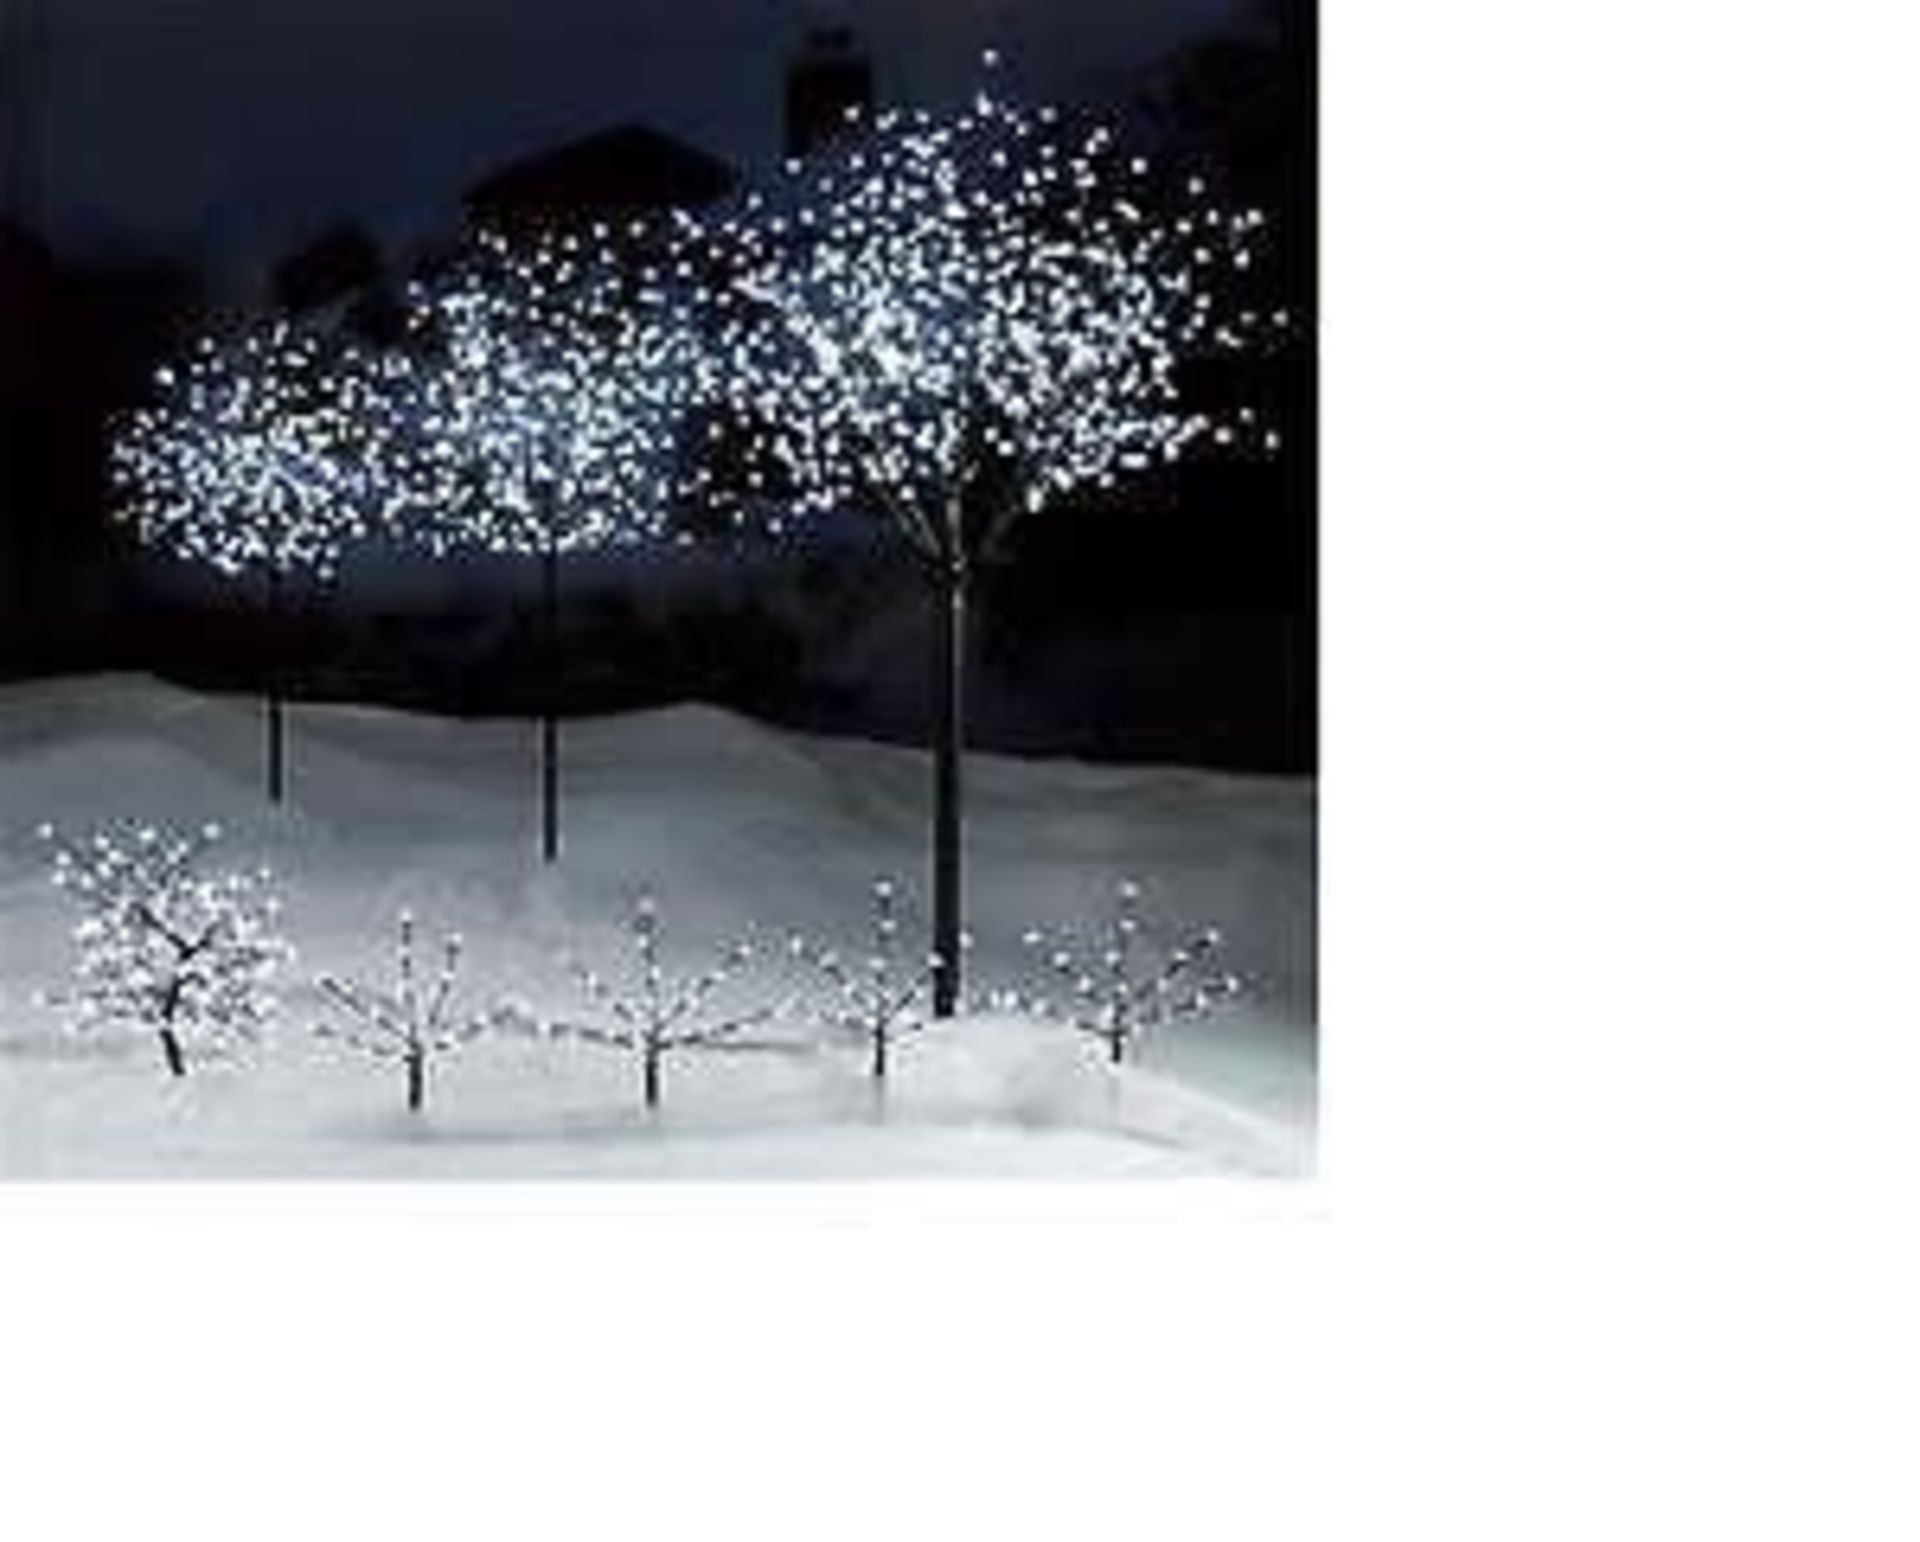 V Brand New 150cm Snow White LED Blossom Tree For Indoor And Outdoor Use RRP £54.99 - Image 3 of 4